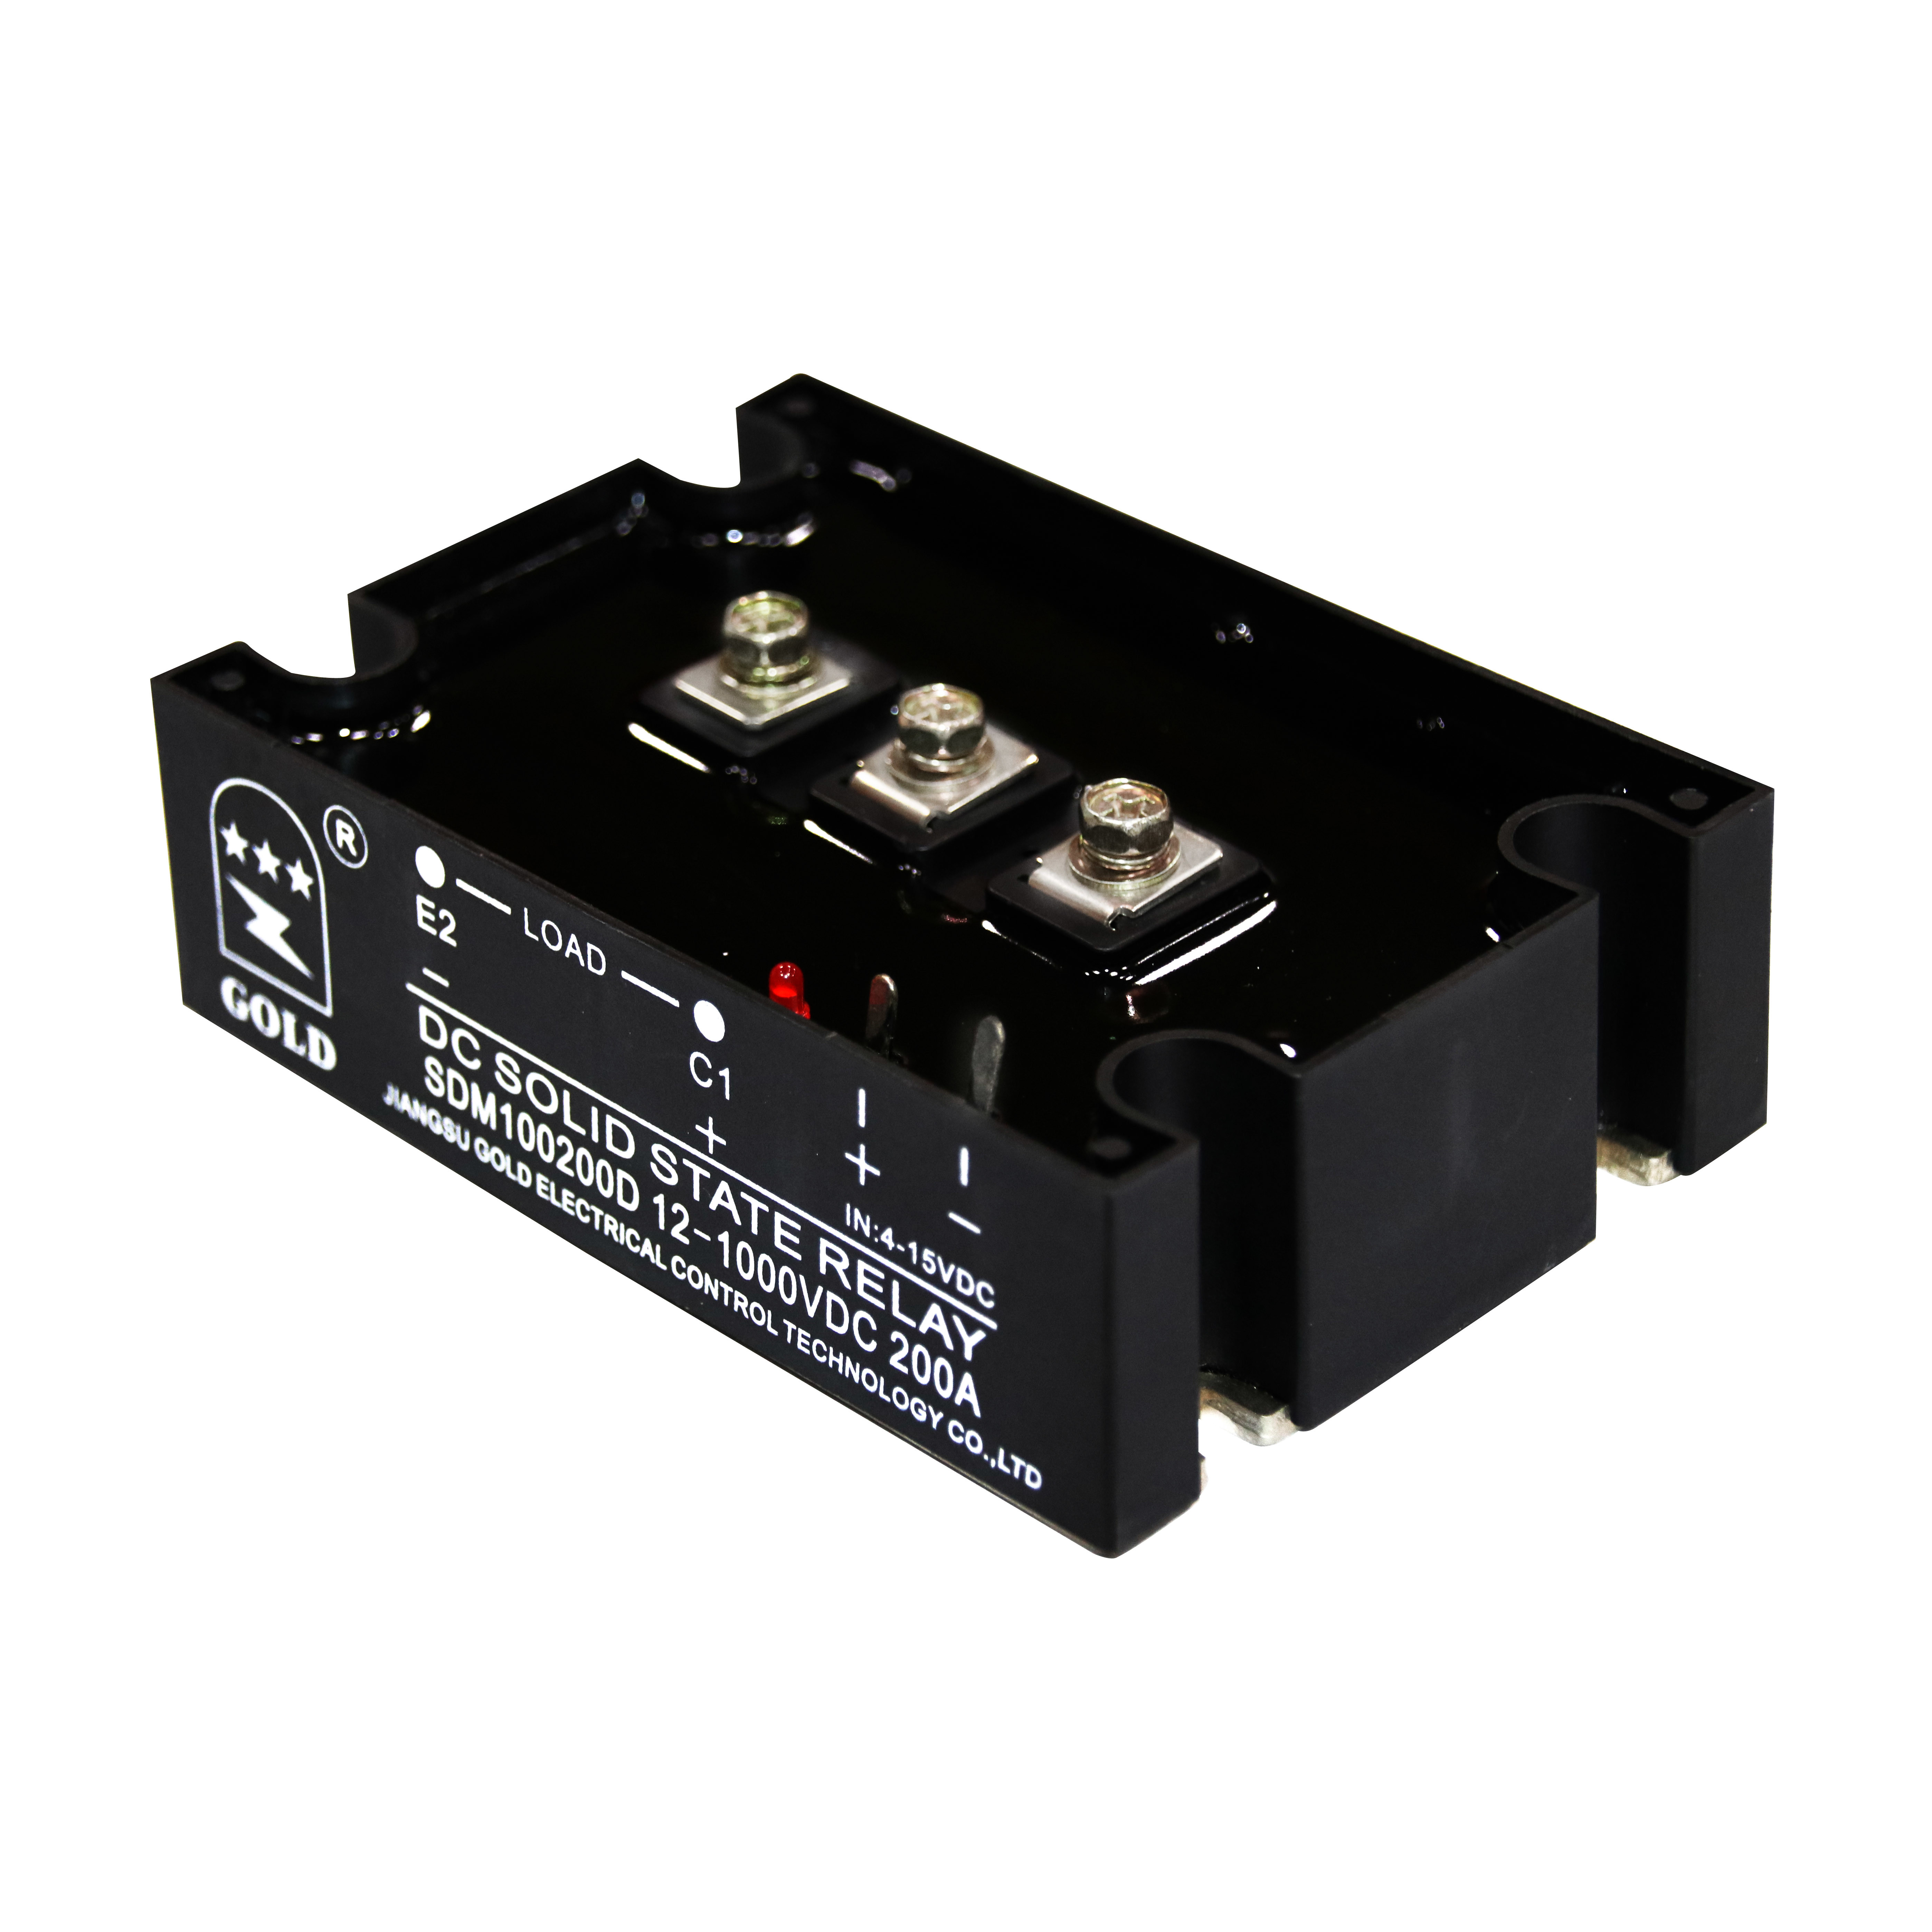 Quality NO Indicator High Power Electronic 5A 15-28VDC SSR Relay for sale